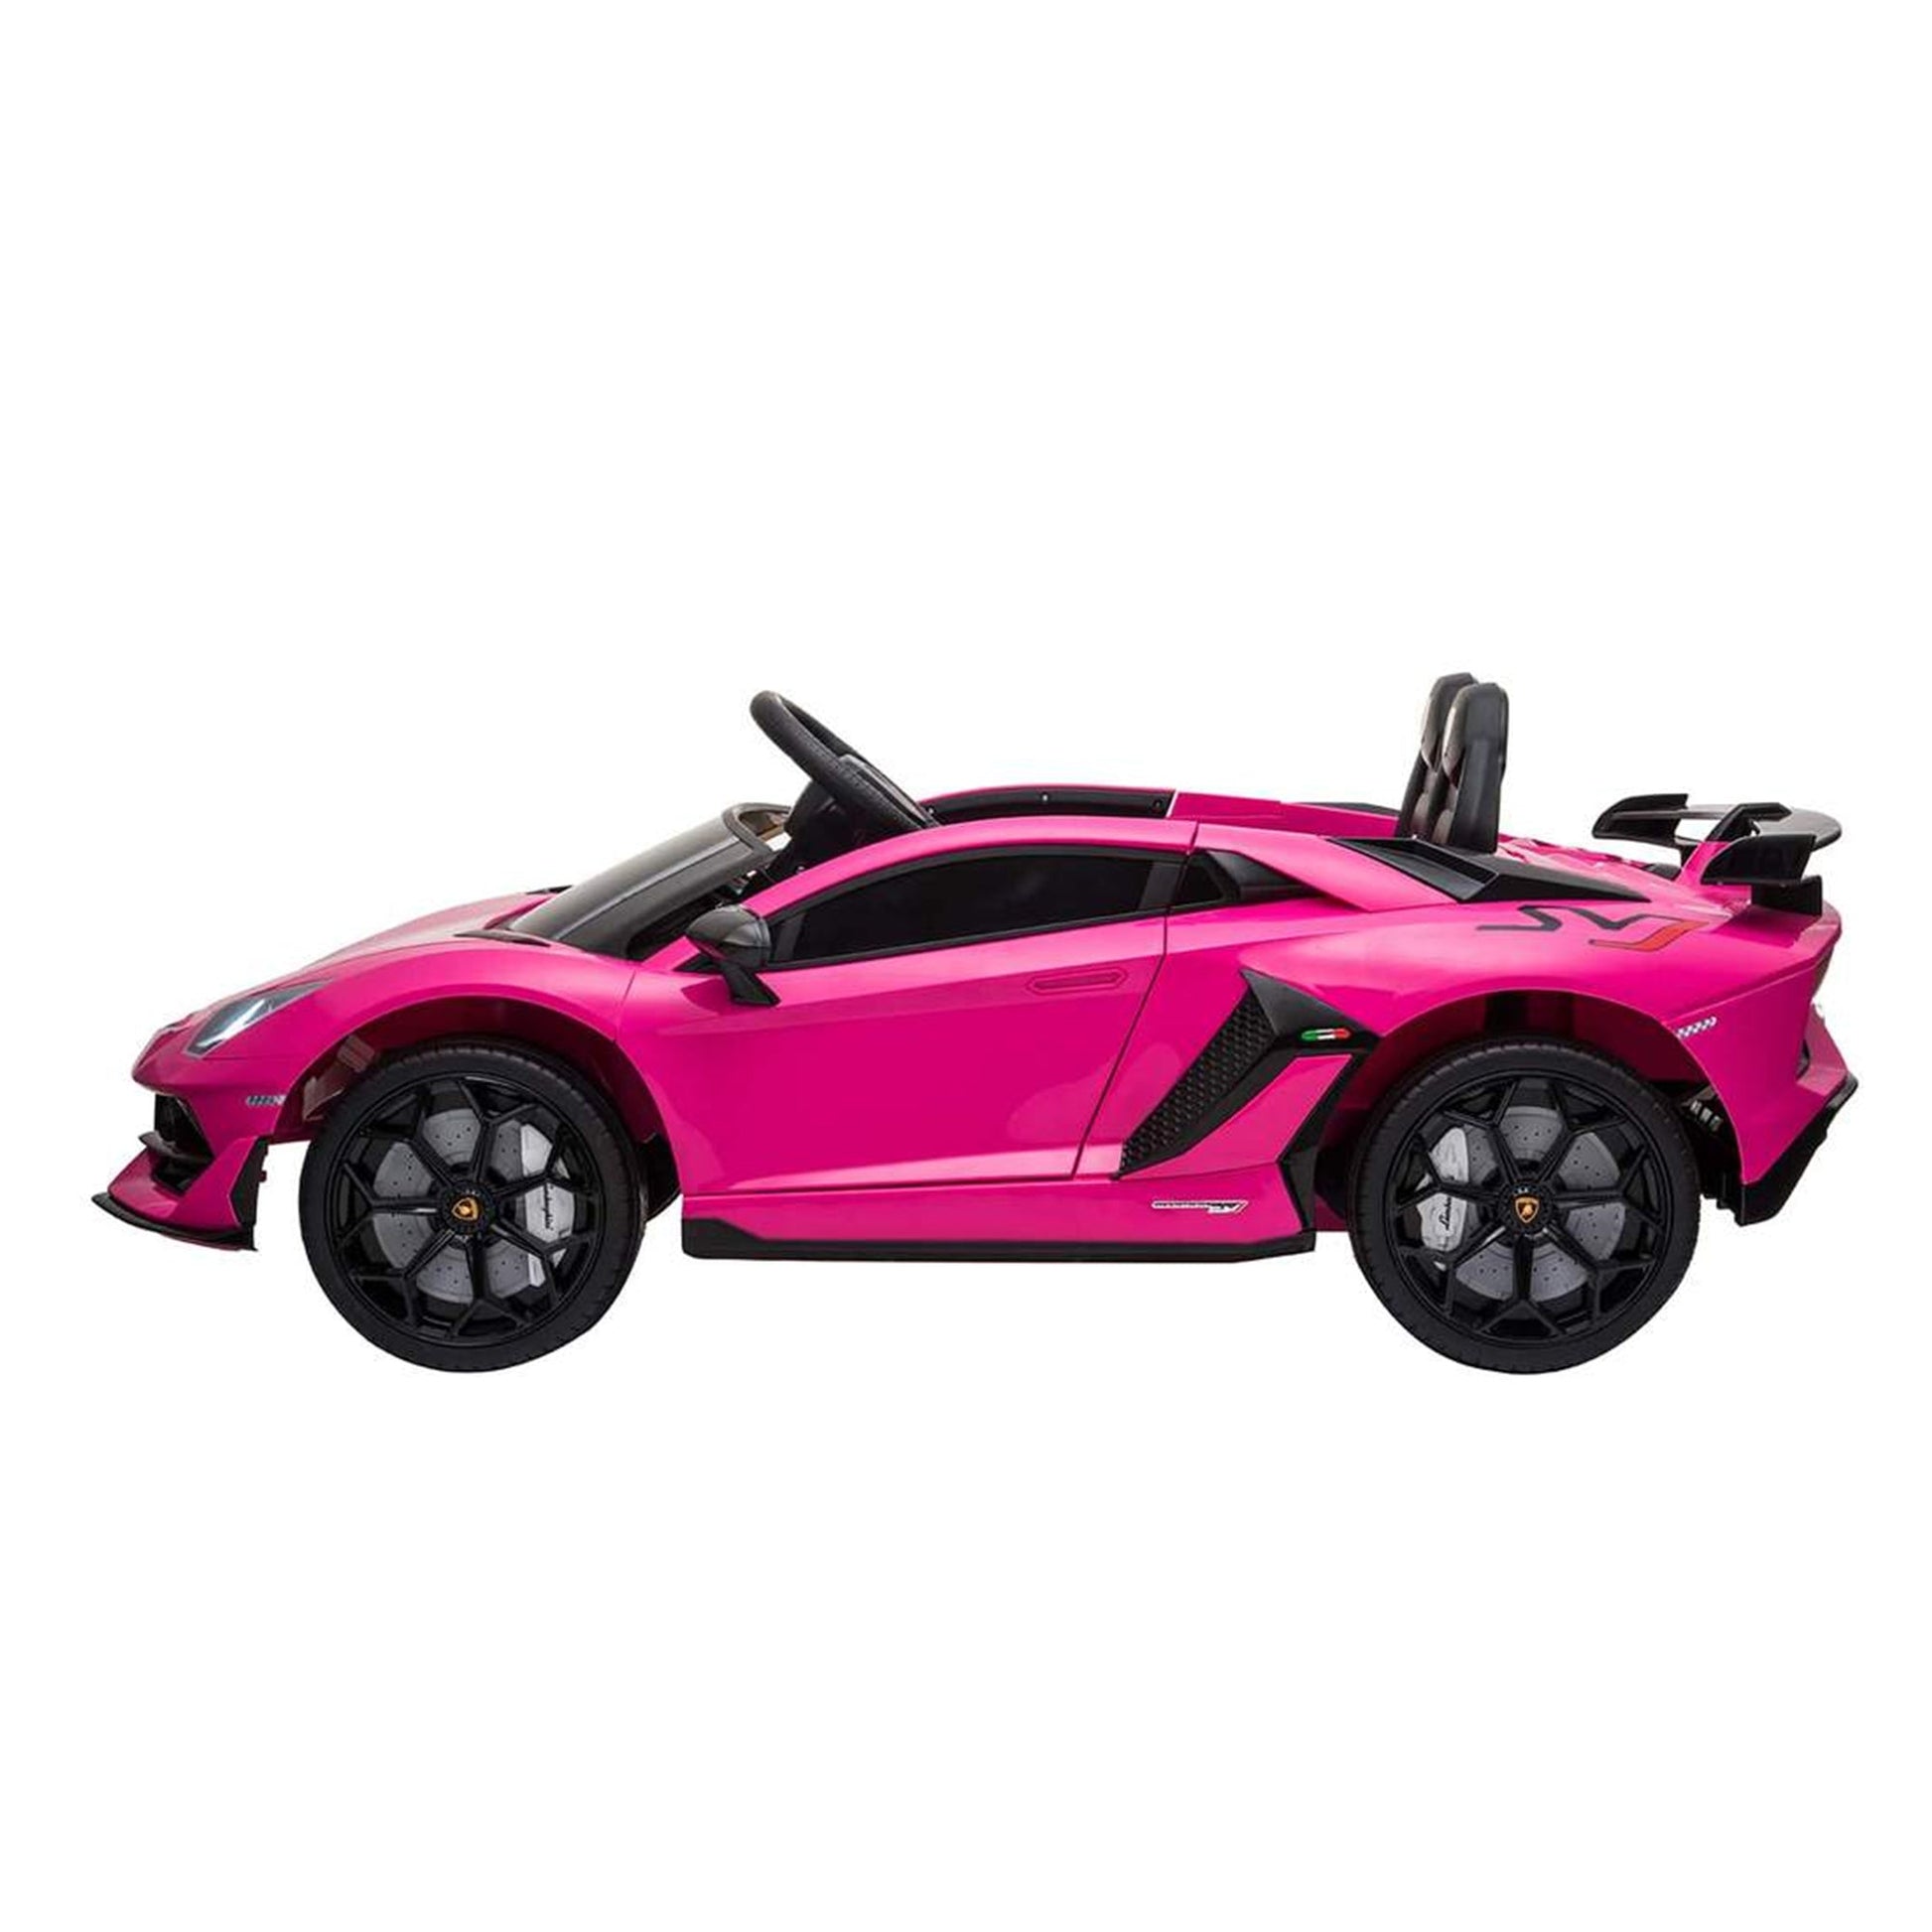 "Exclusive Pink Lamborghini SVJ 12 Volt Kids Electric Ride on with remote from Kids Car store, against a white backdrop"